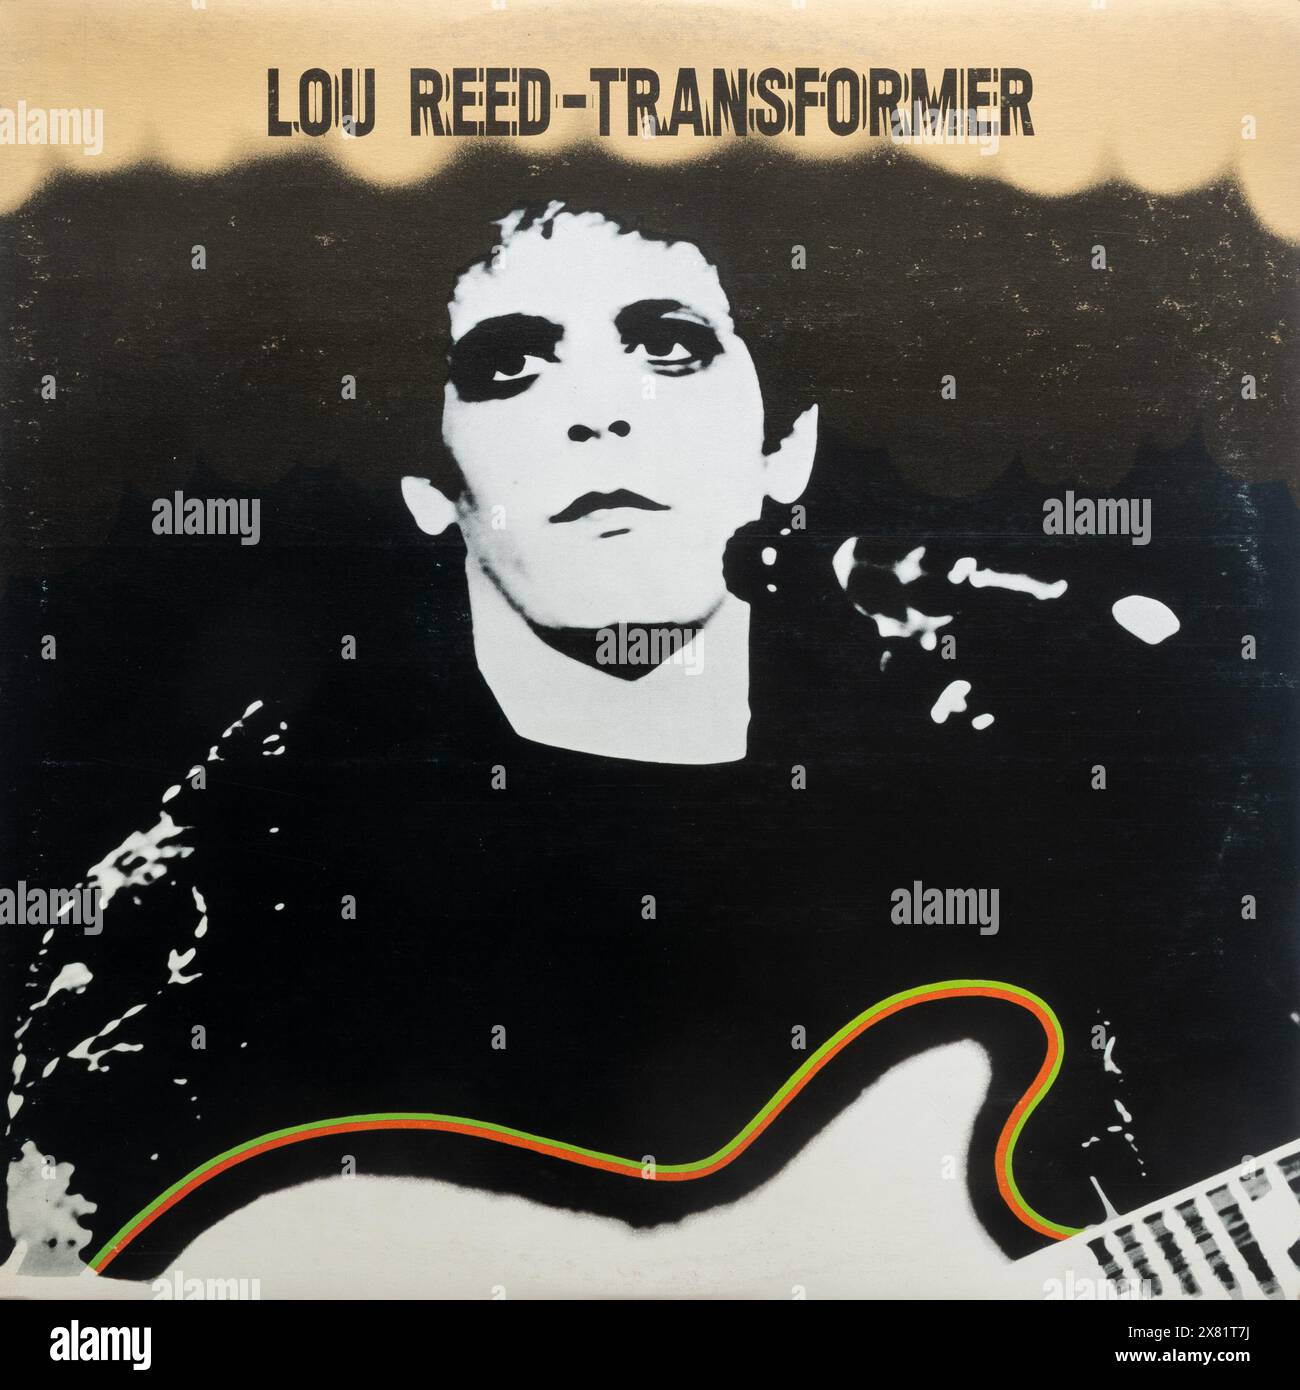 Transformer album cover by Lou Reed, vinyl LP record Stock Photo